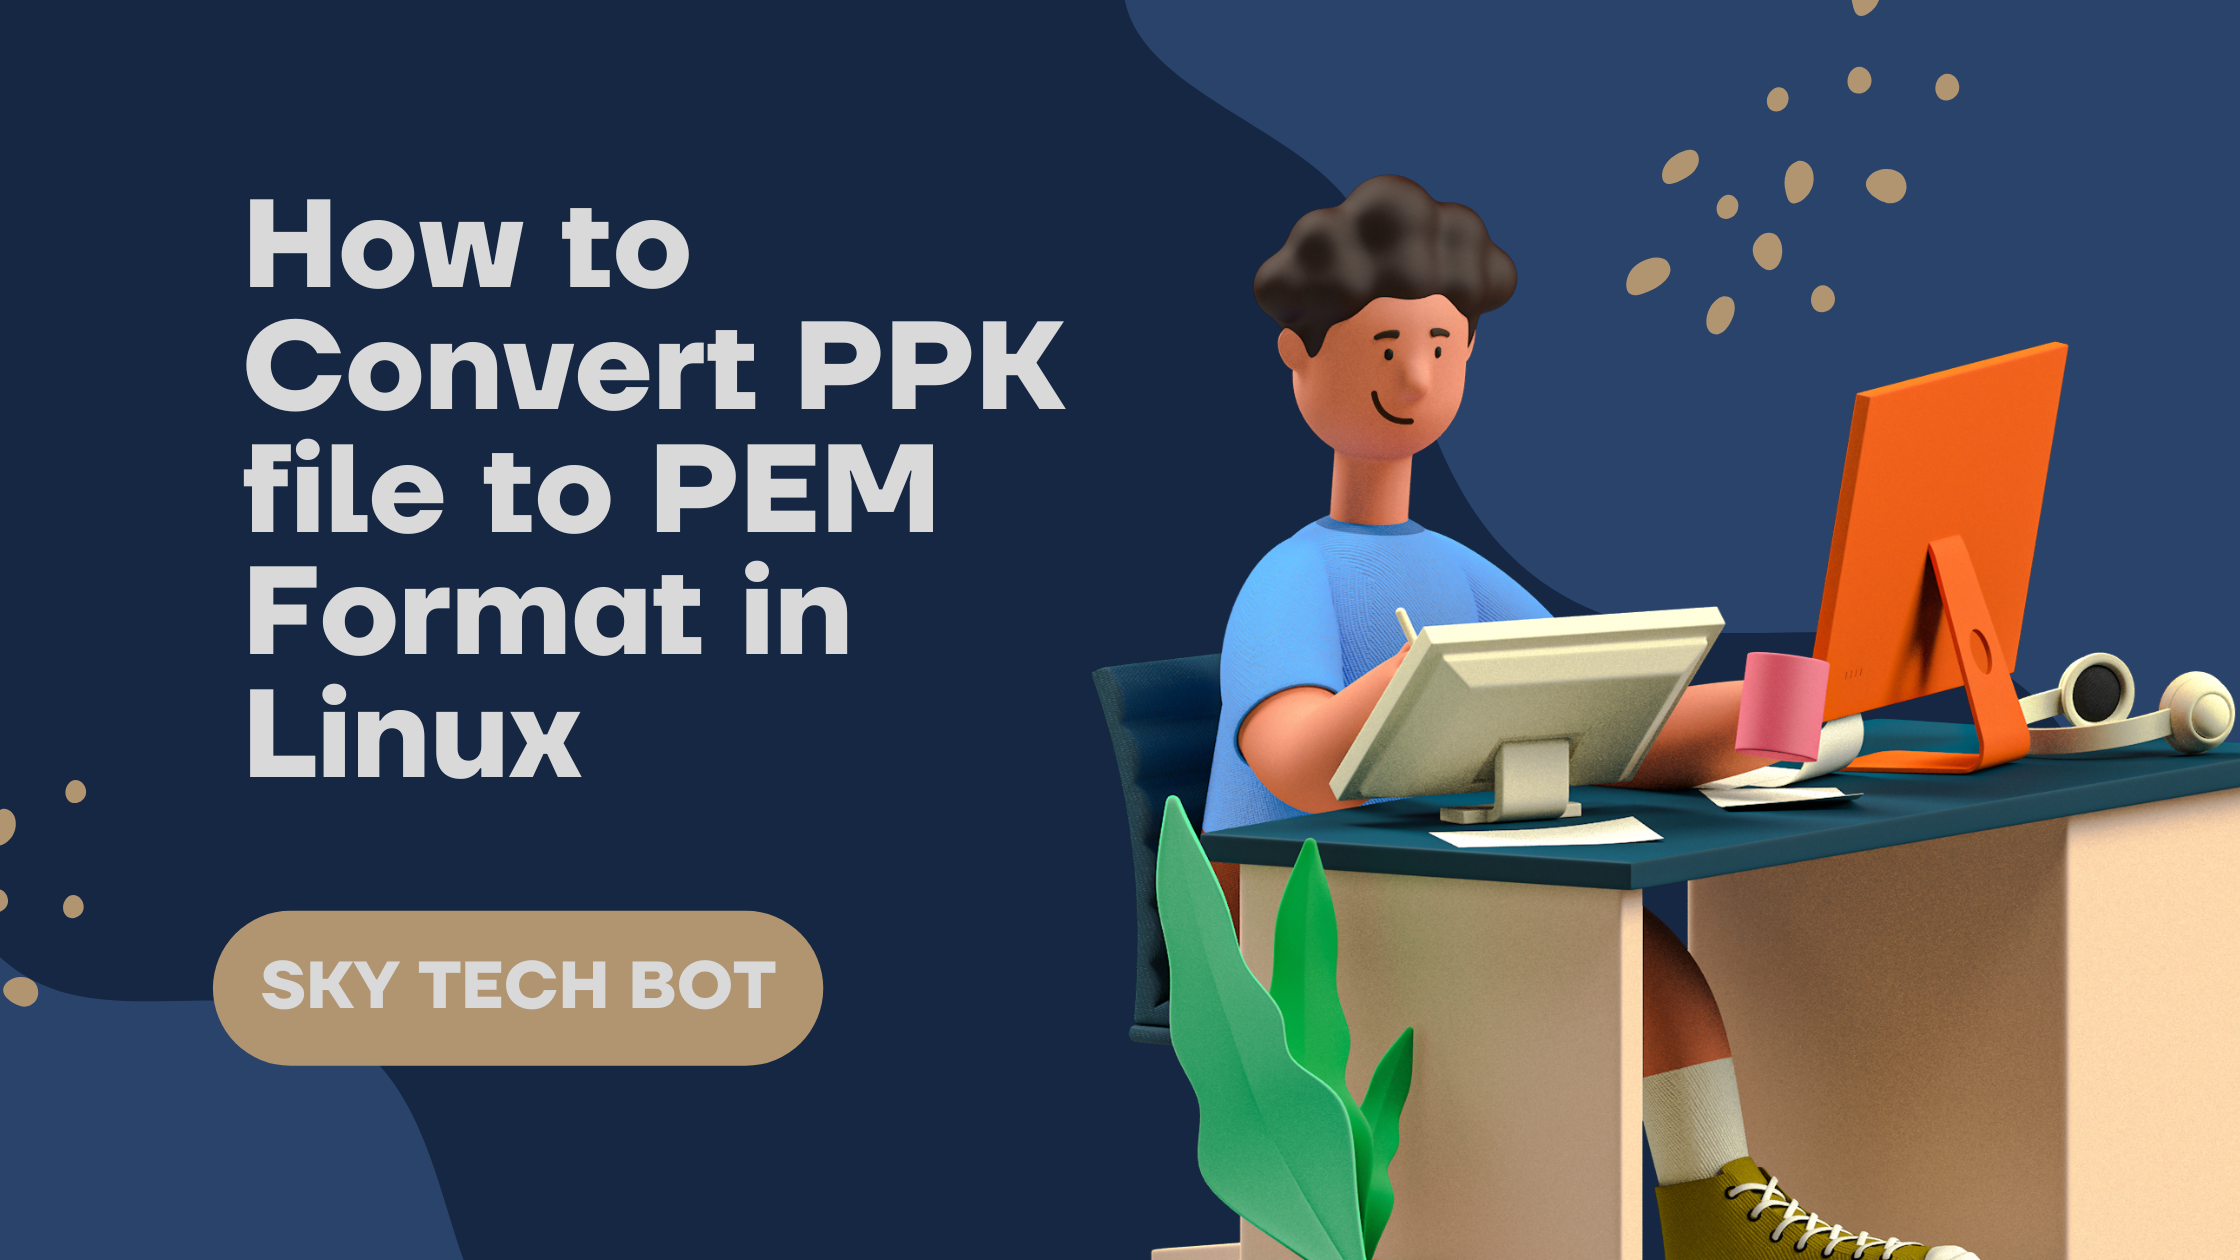 How to Convert PPK file to PEM Format in Linux